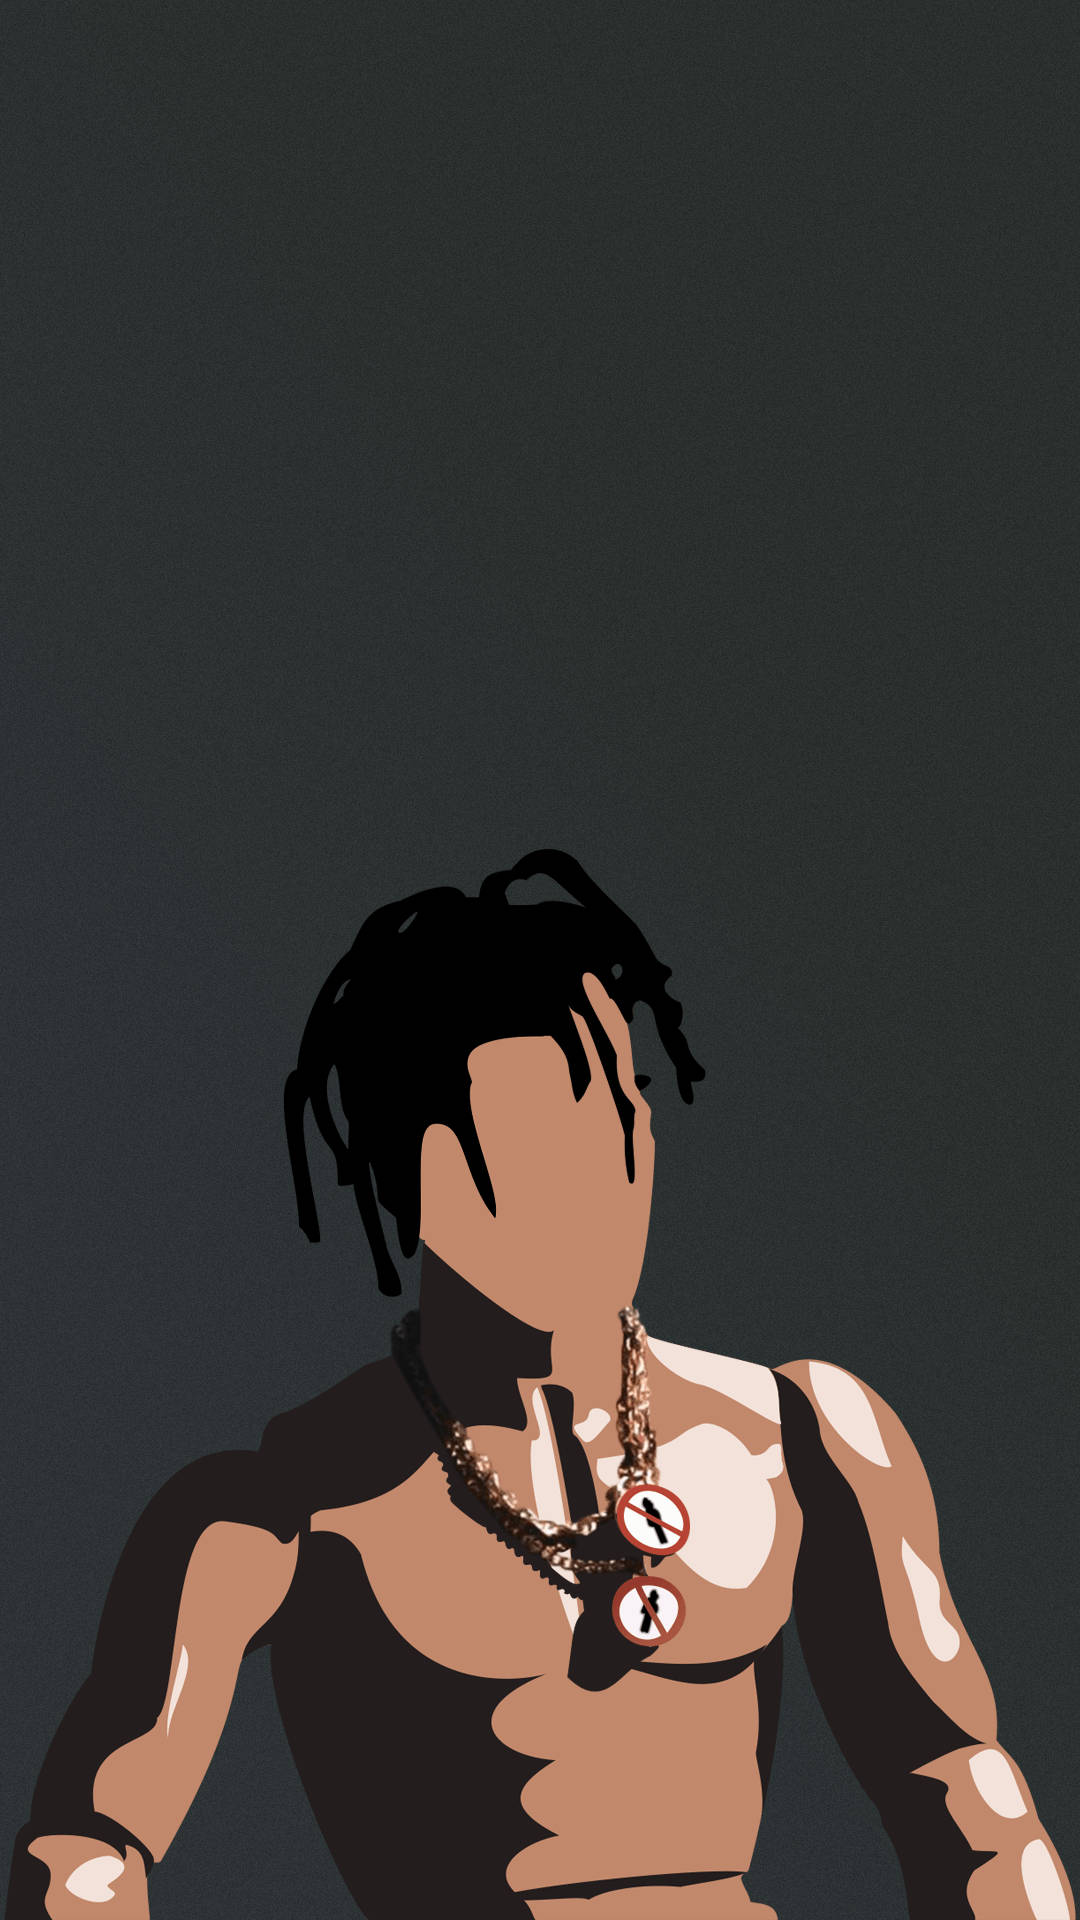 Rodeo wallpapers 4 mobile  desktop made em from a frame of the 90210  music video  rtravisscott